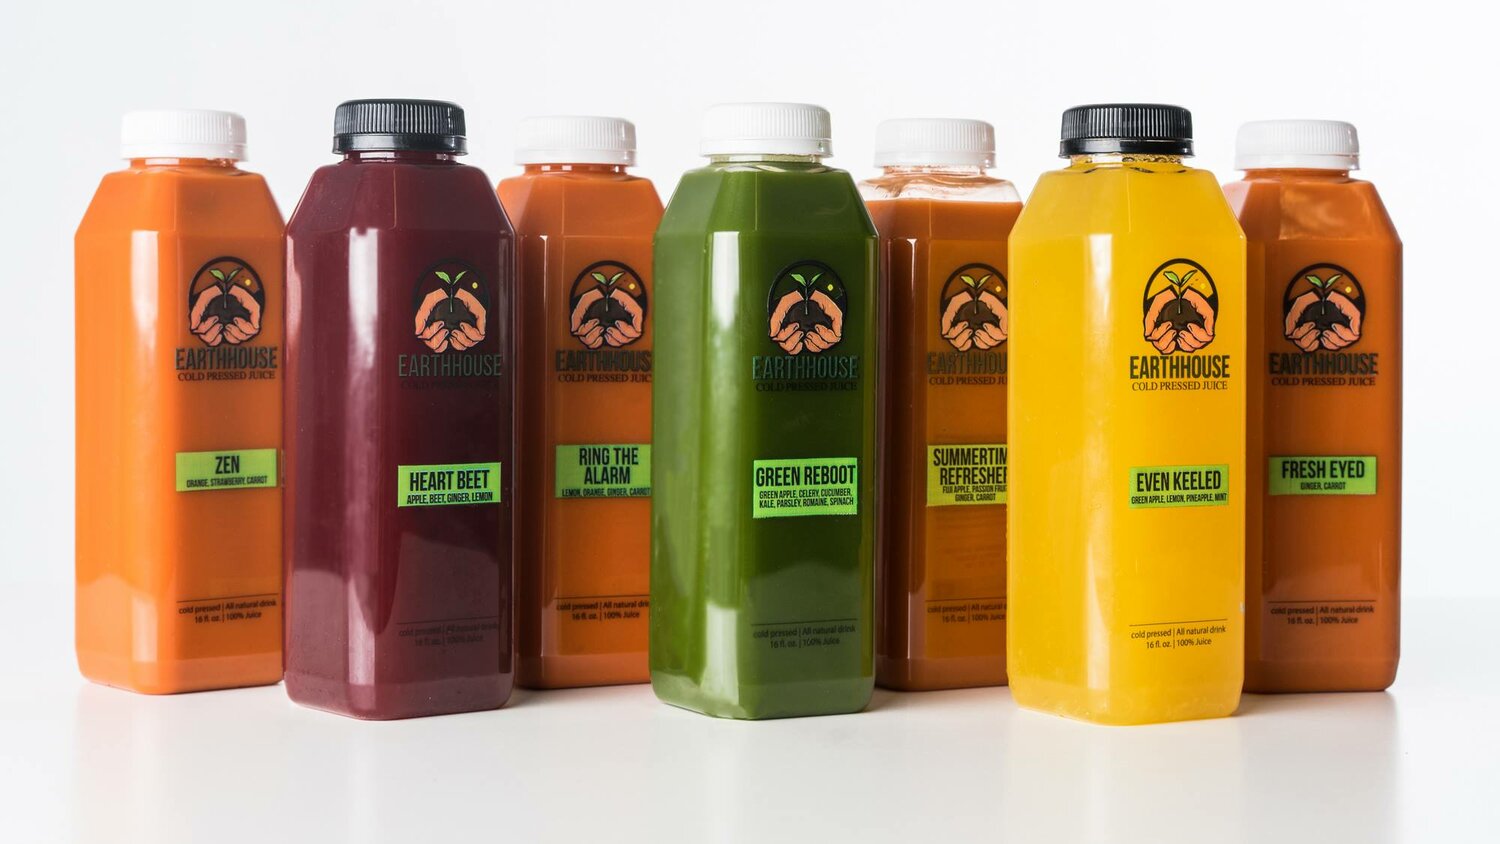 Liquid energy comes in a variety of juices at Earthhouse.